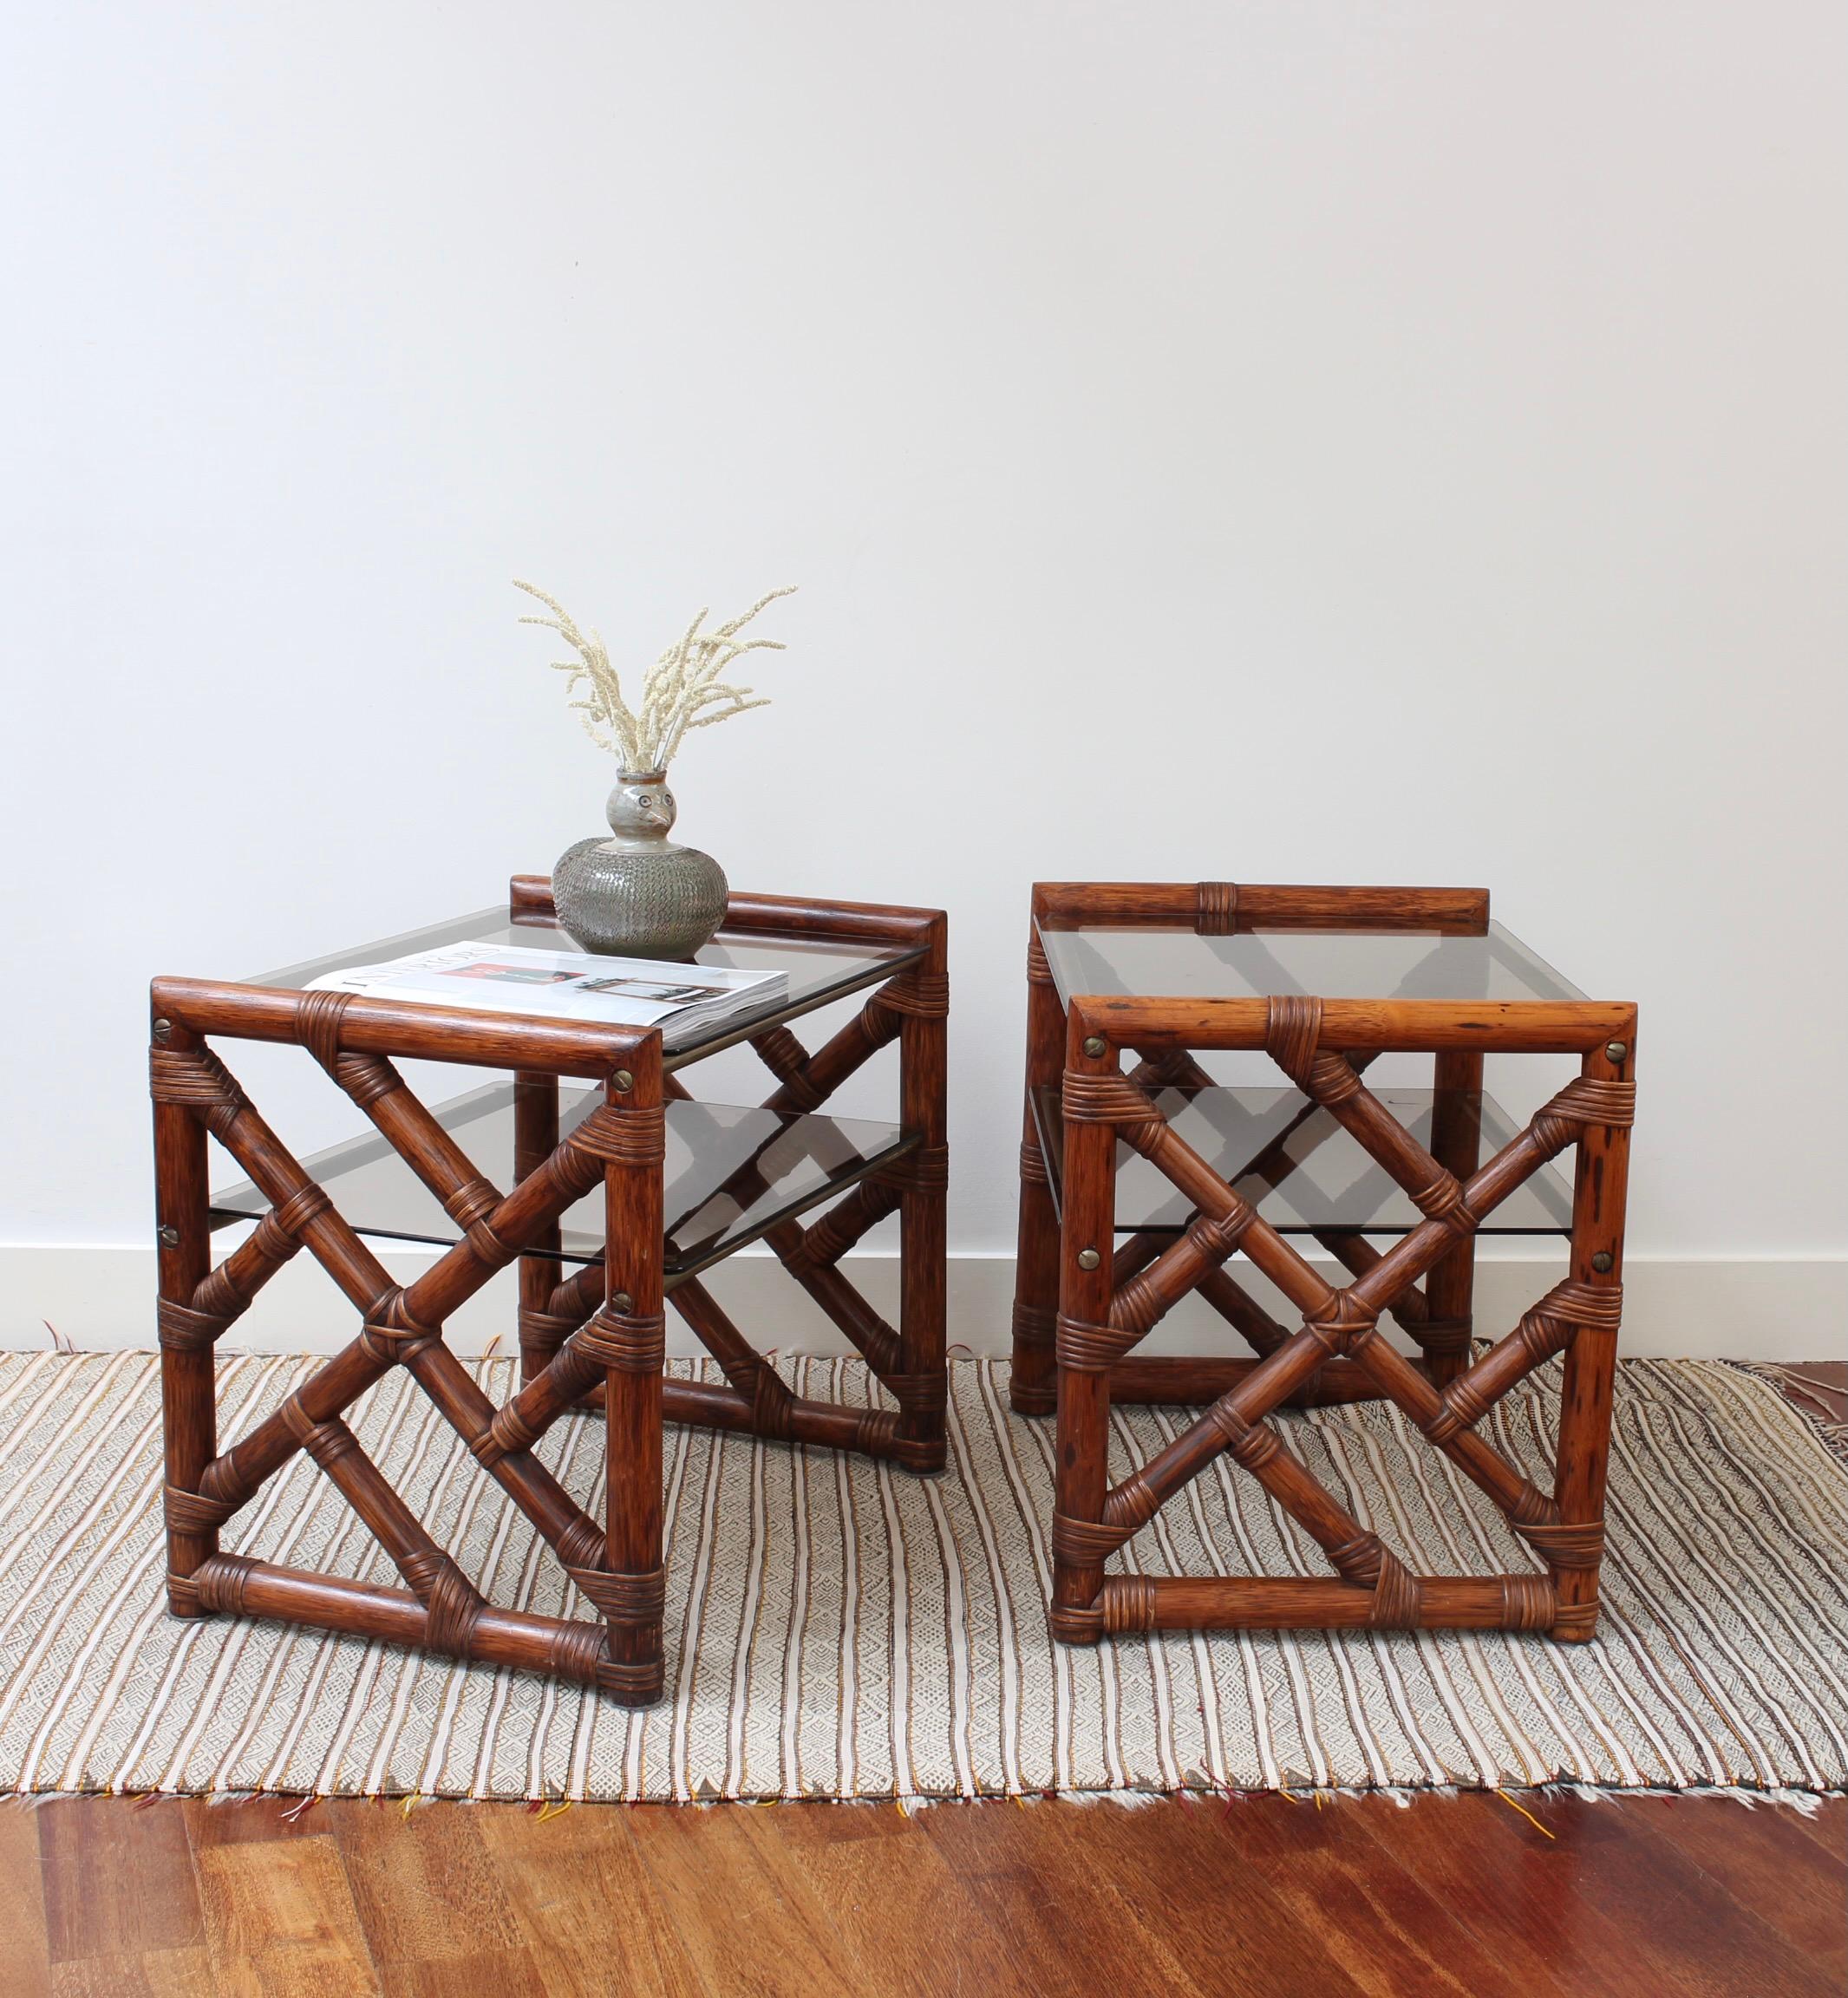 A pair of vintage Italian side tables (circa 1970s) that were discovered in Florence, Italy. Stunning design from top to bottom, the frames consist of rectangular bamboo ends stained in a delicious reddish-brown with geometrically positioned struts